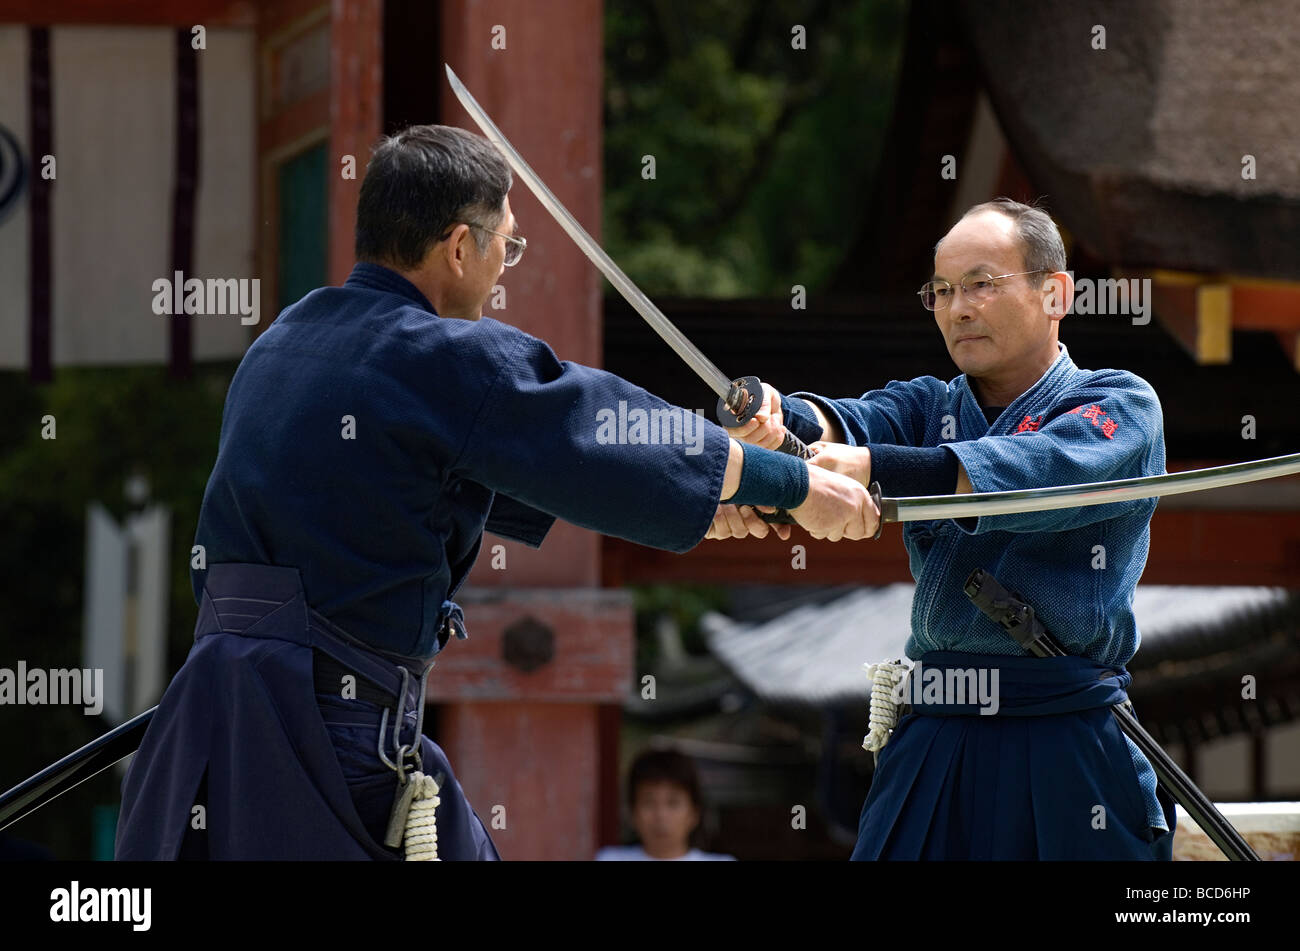 Two Men Engaged In A Sword Fight Using Real Samurai Swords During A